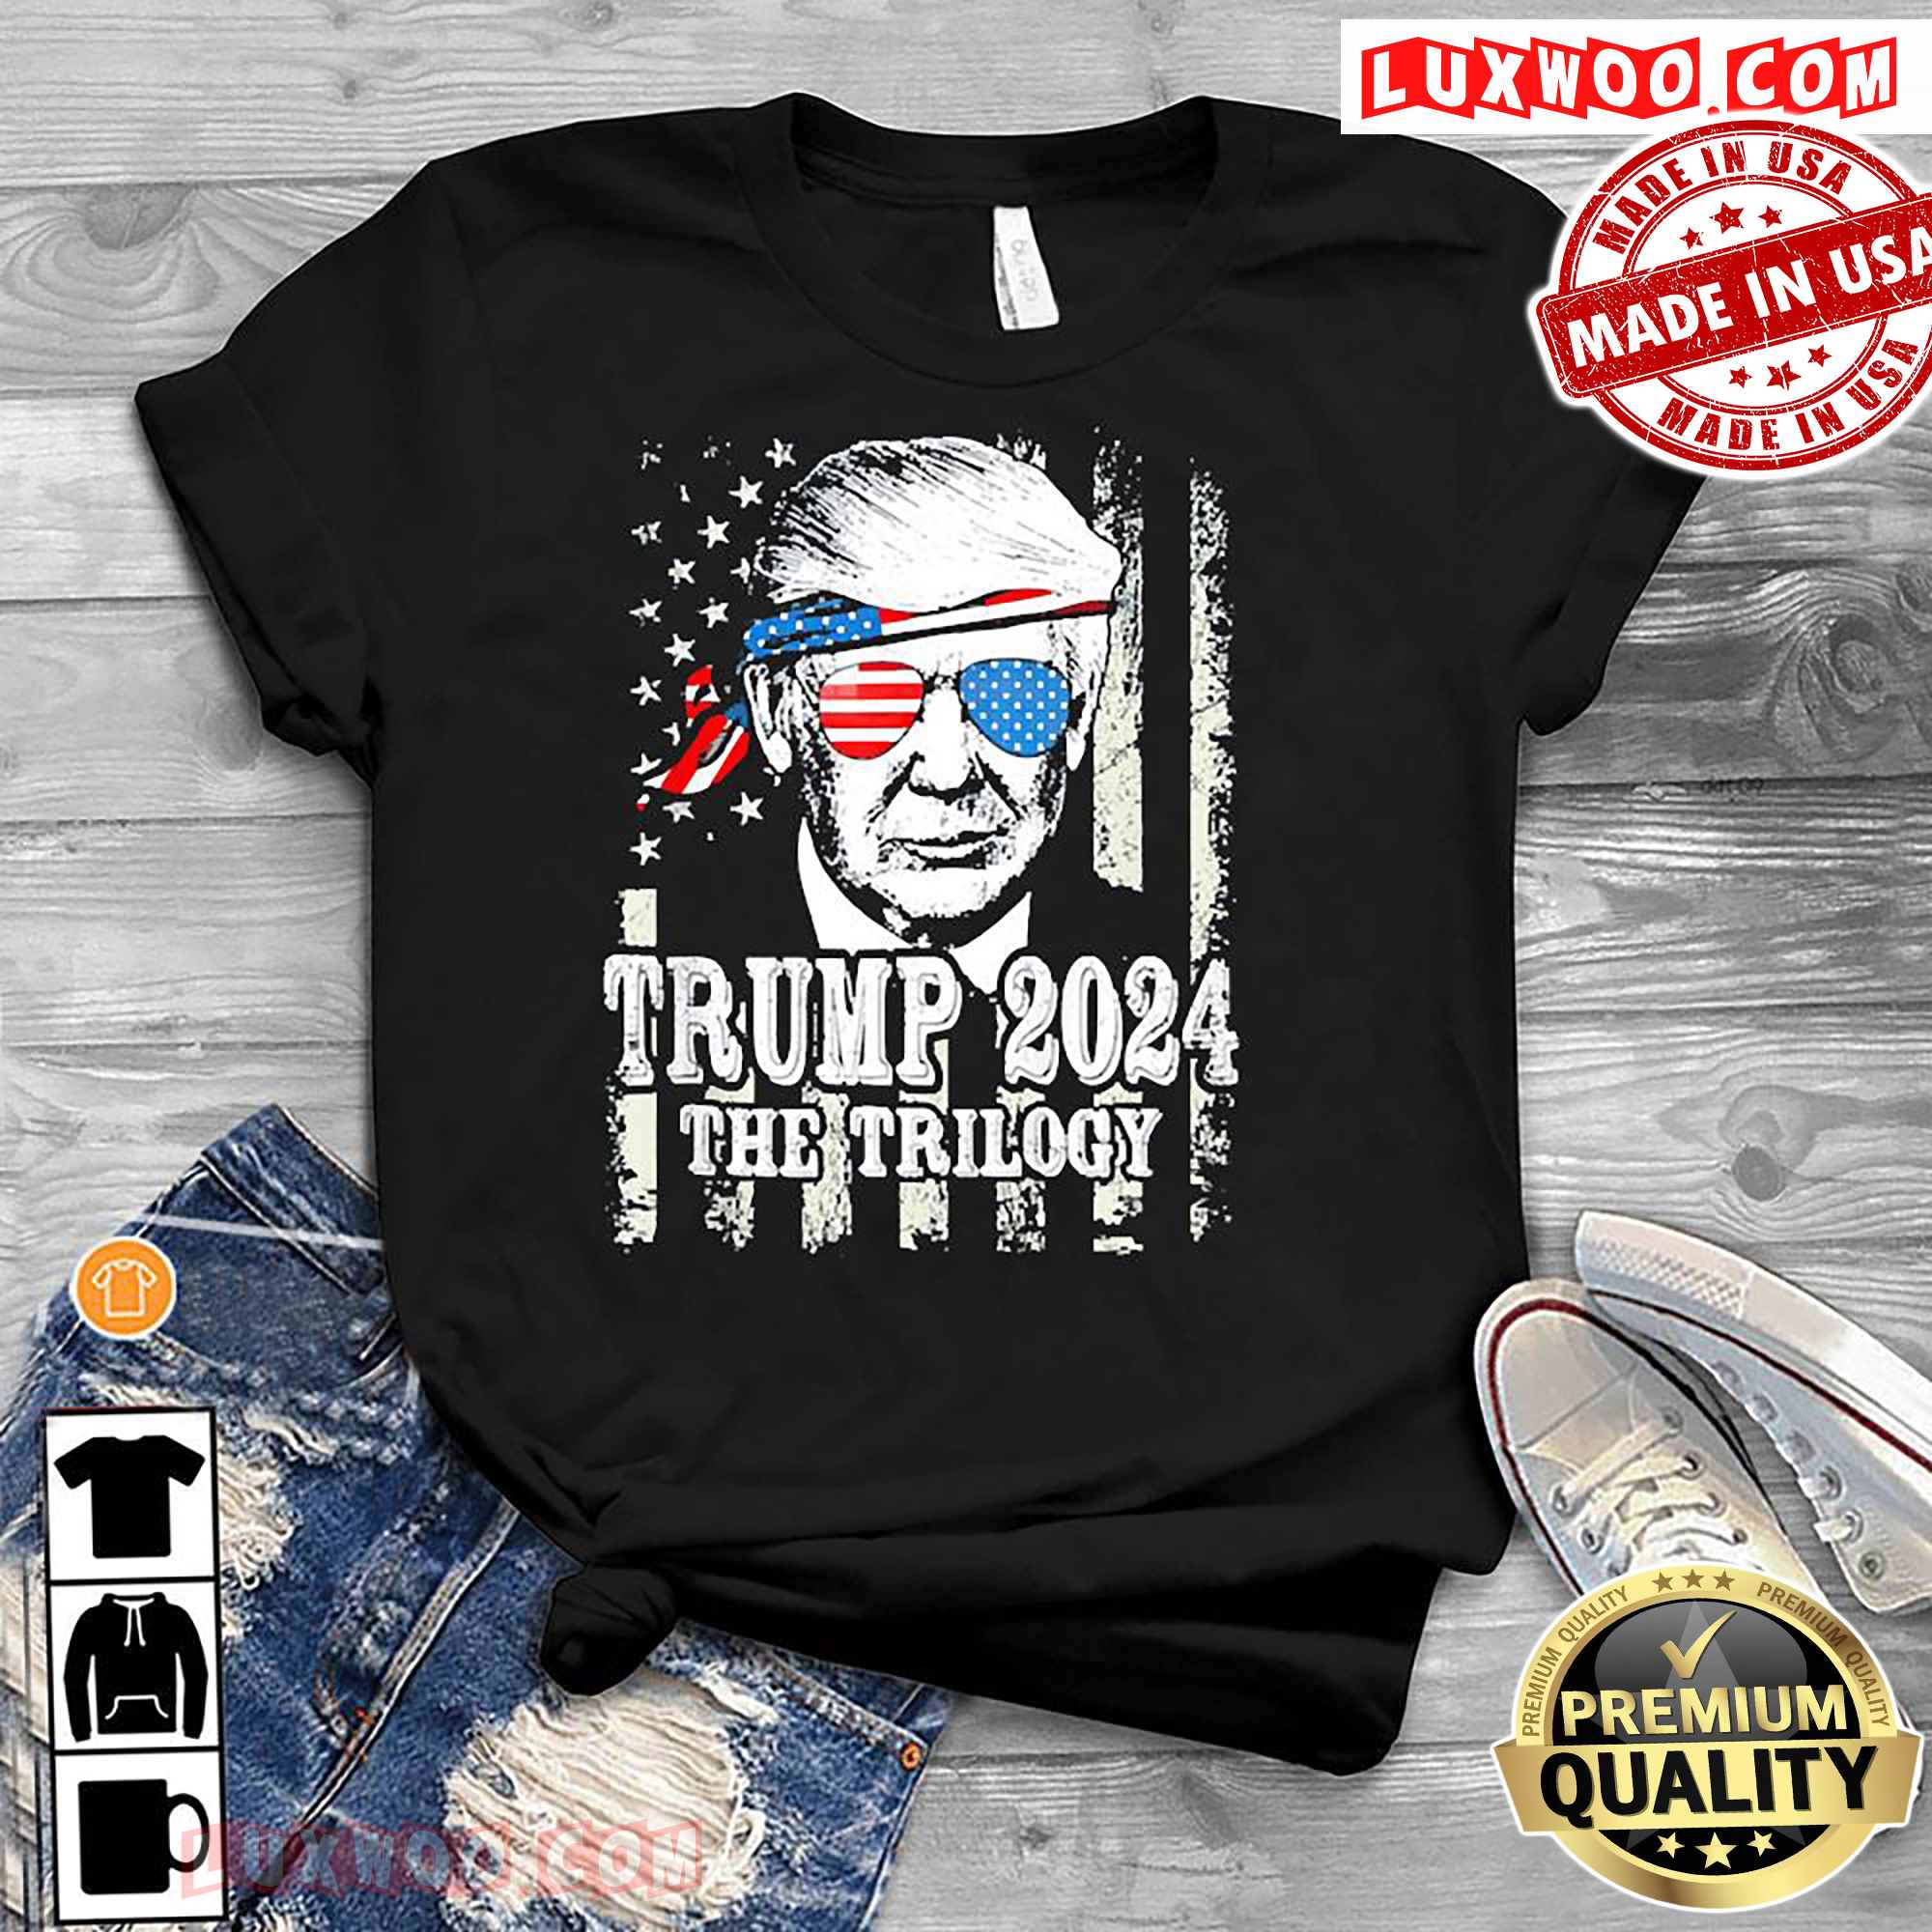 Pro Trump American Flag Re-relection Trump 2024 The Trilogy Shirt ...